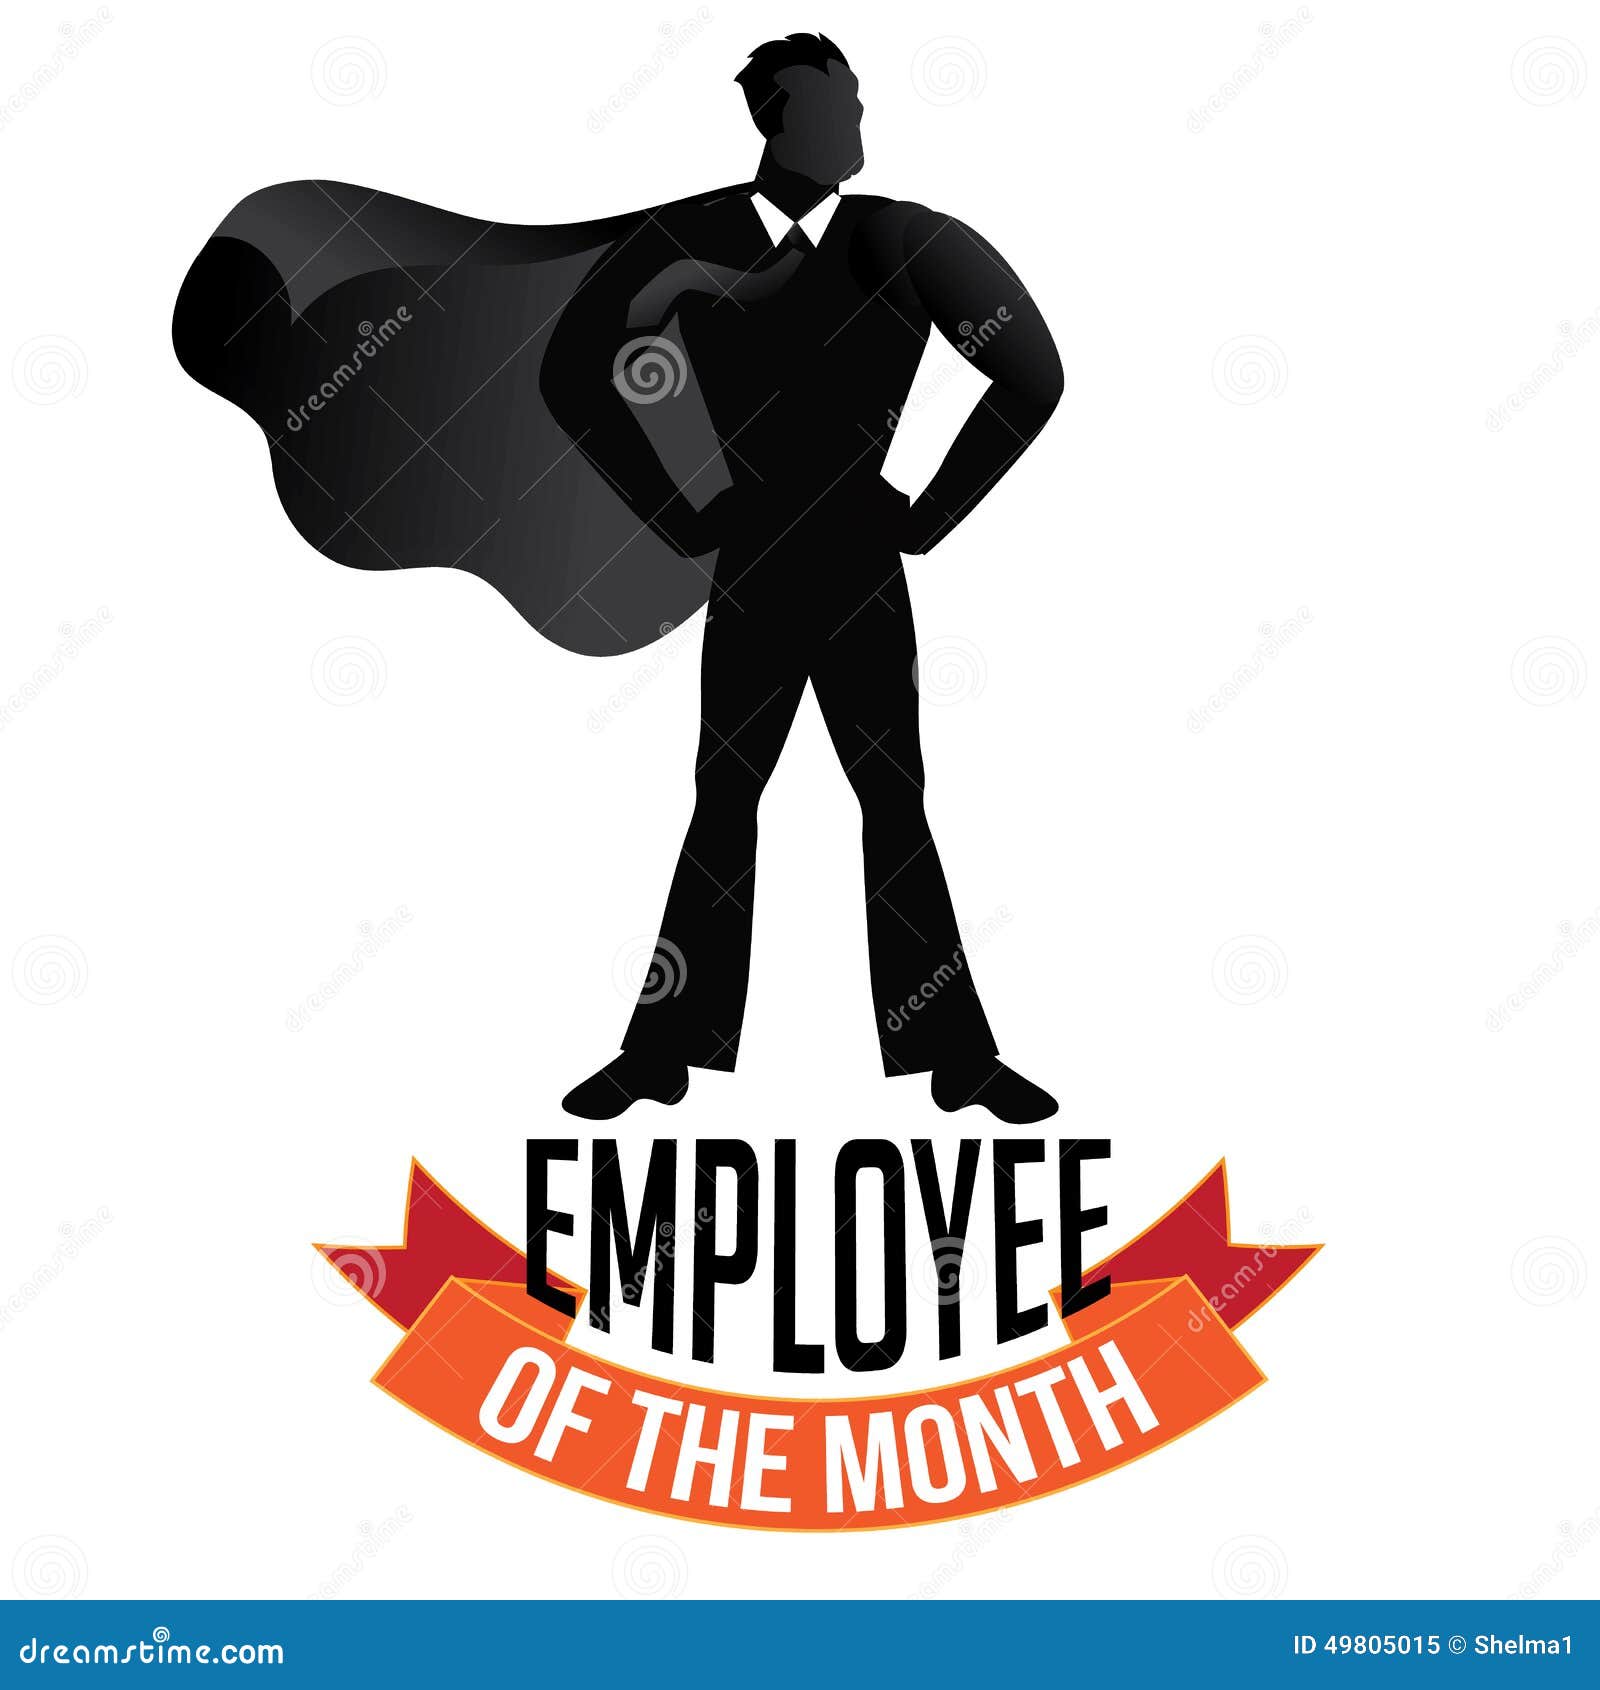 employee of the month clip art - photo #14